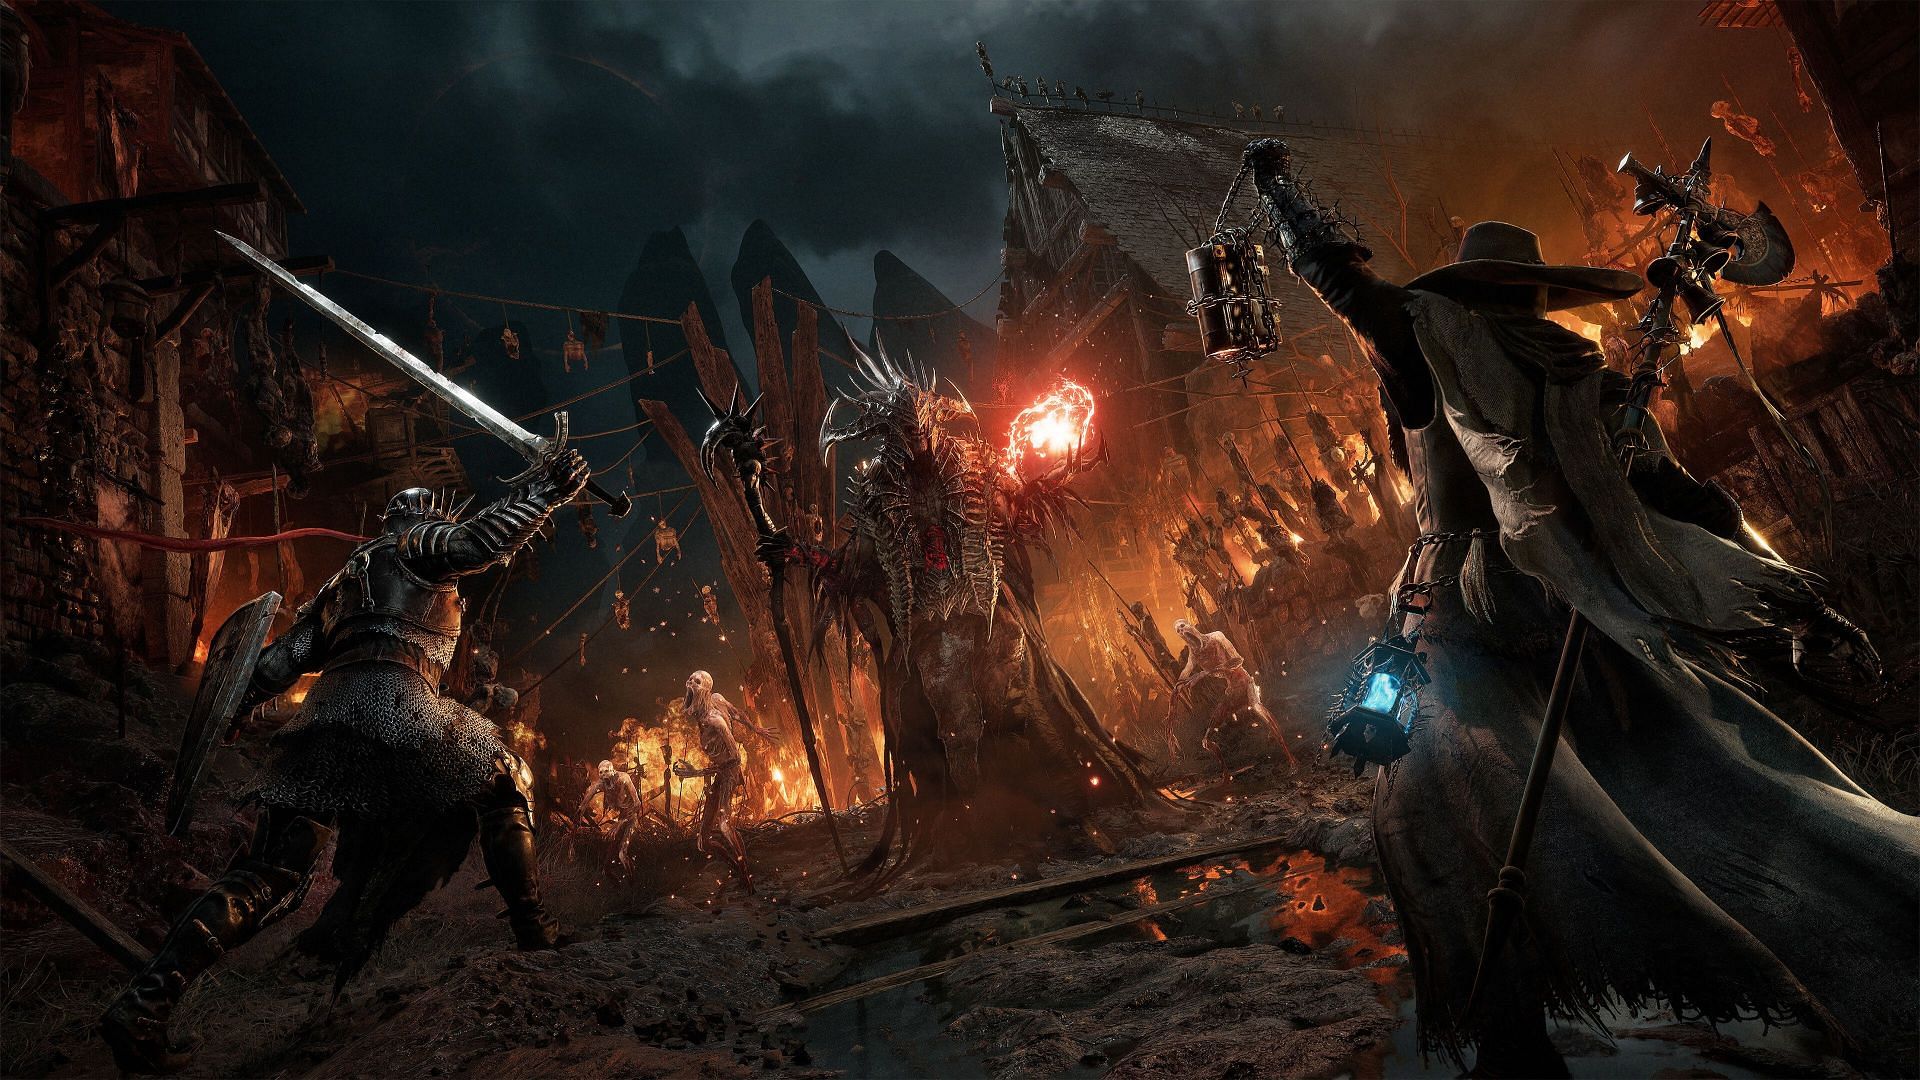 Is Lords of the Fallen in Game Pass? - Answered - Prima Games